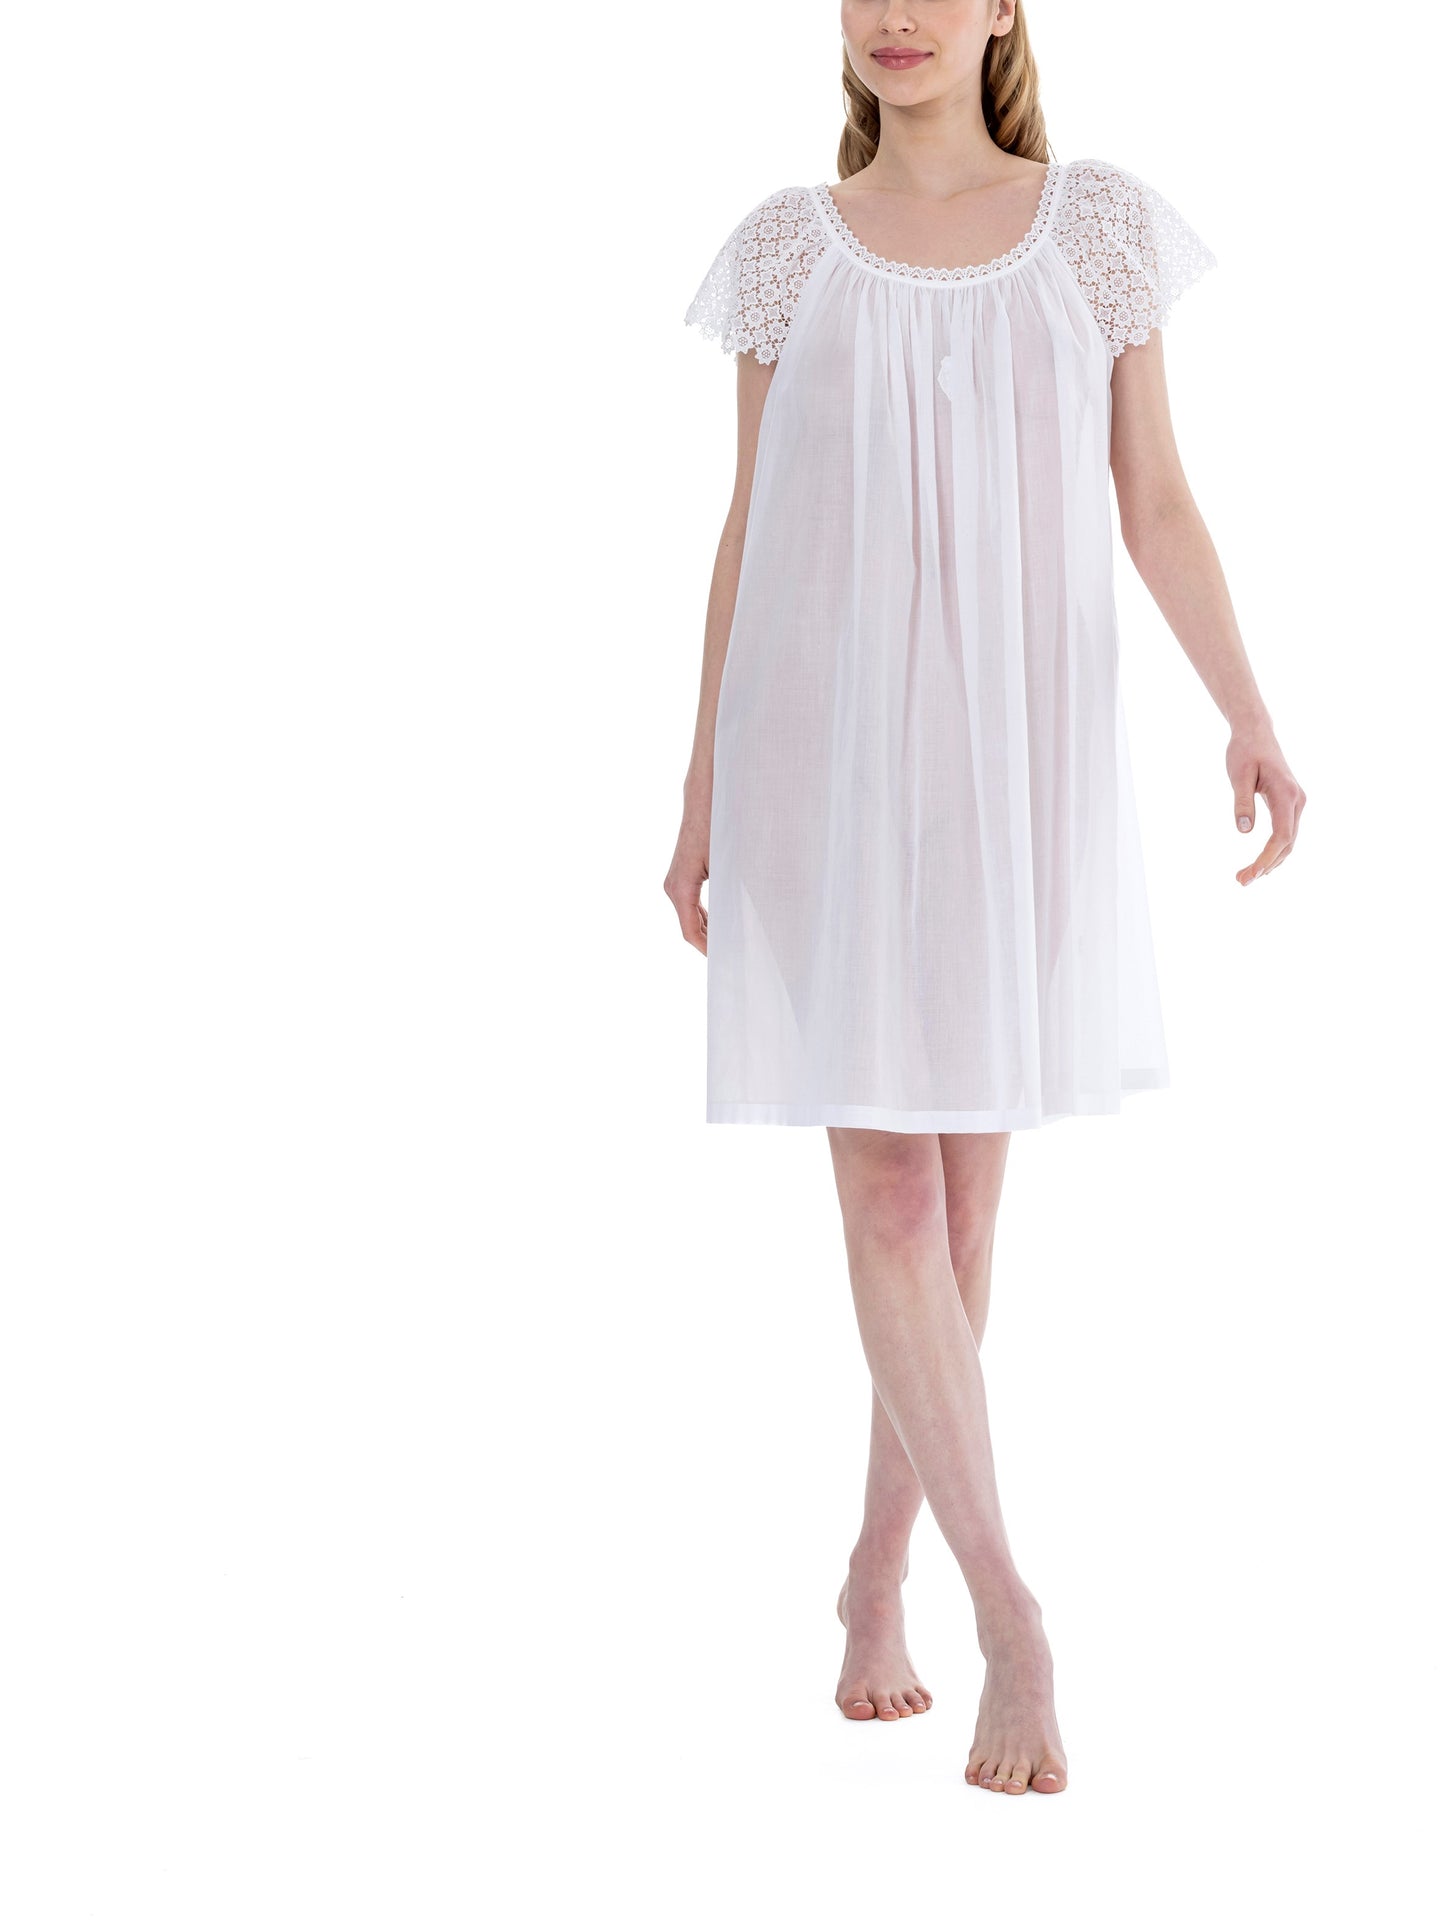 White Short (96cm) short sleeve nightgown. Lace detail on the gently rounded neckline with beautiful all lace short sleeve. Flared skirt for ease of movement when sleeping. Made in Germany from the finest pure Swiss cotton, Celestine nightdresses are diaphanous, offering perfect sleep without heaviness. Celestine nightwear, dressing gowns and short robes drop from the shoulder, therefore one size fits all.  Fabric composition:  100% Pure Swiss Cotton. 100% Guipure Cotton Lace. Machine Washable.